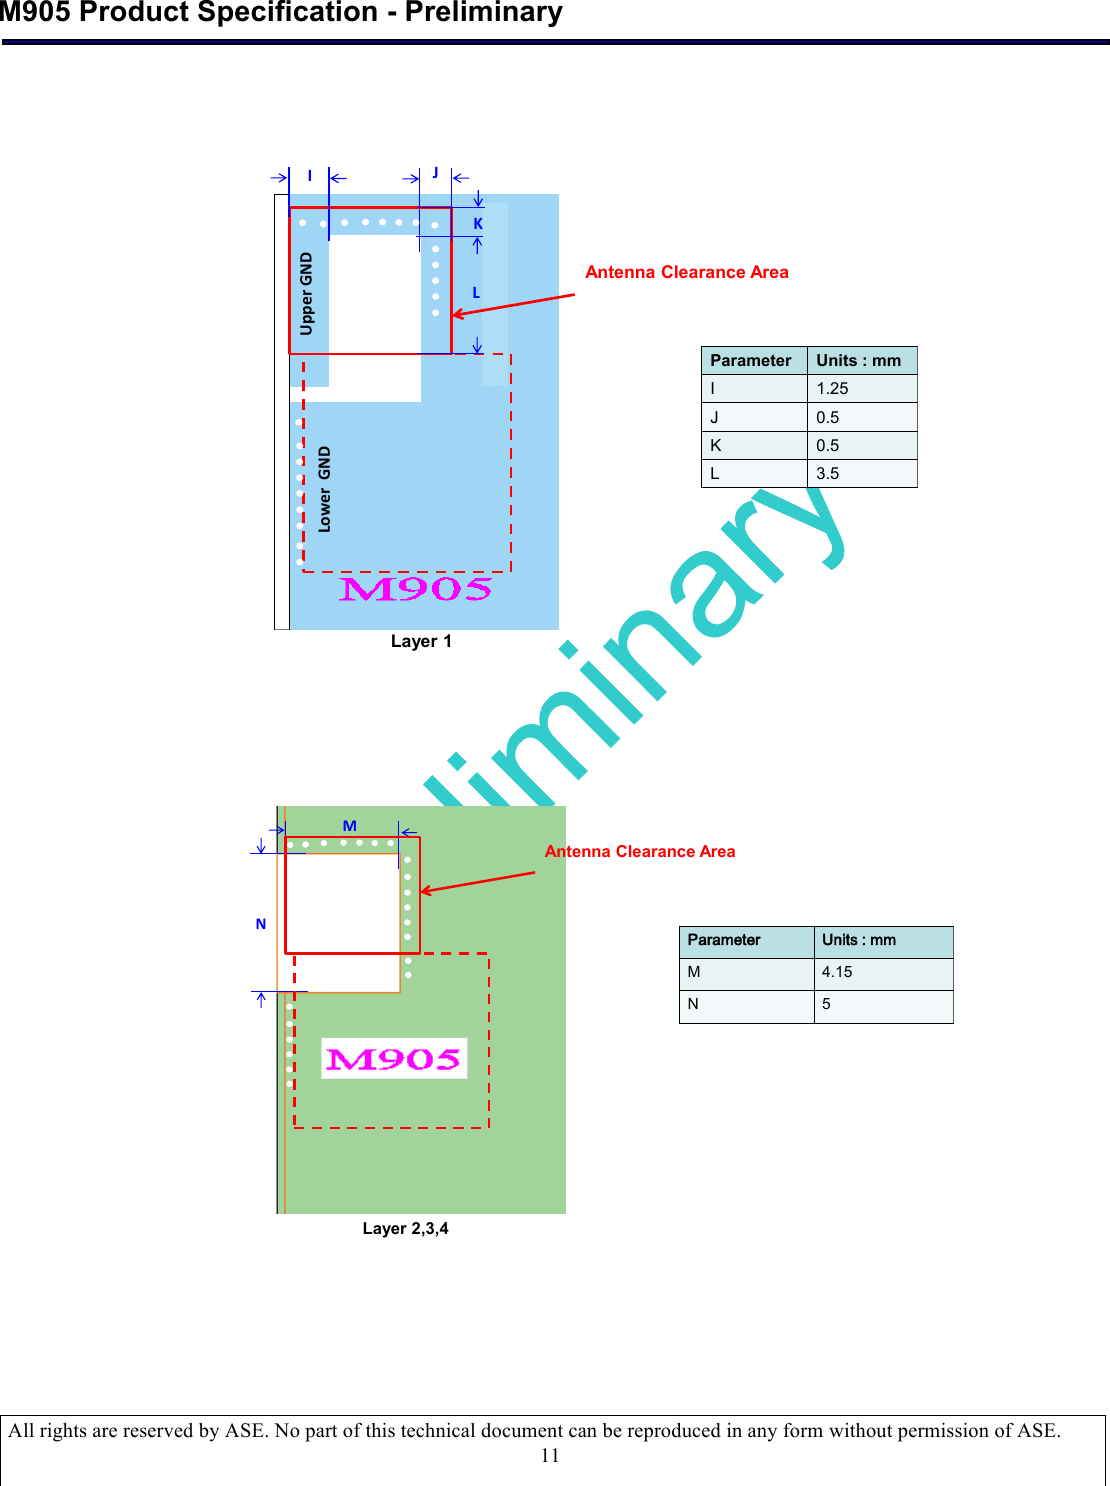  M905 Product Specification - Preliminary  All rights are reserved by ASE. No part of this technical document can be reproduced in any form without permission of ASE.  11                                              ParameterUnits : mmI1.25J0.5K0.5L3.5Layer 1Antenna Clearance AreaIJLUpper(GNDLower((GNDK      NMParameterUnits : mmM4.15N5Layer 2,3,4Antenna Clearance Area     